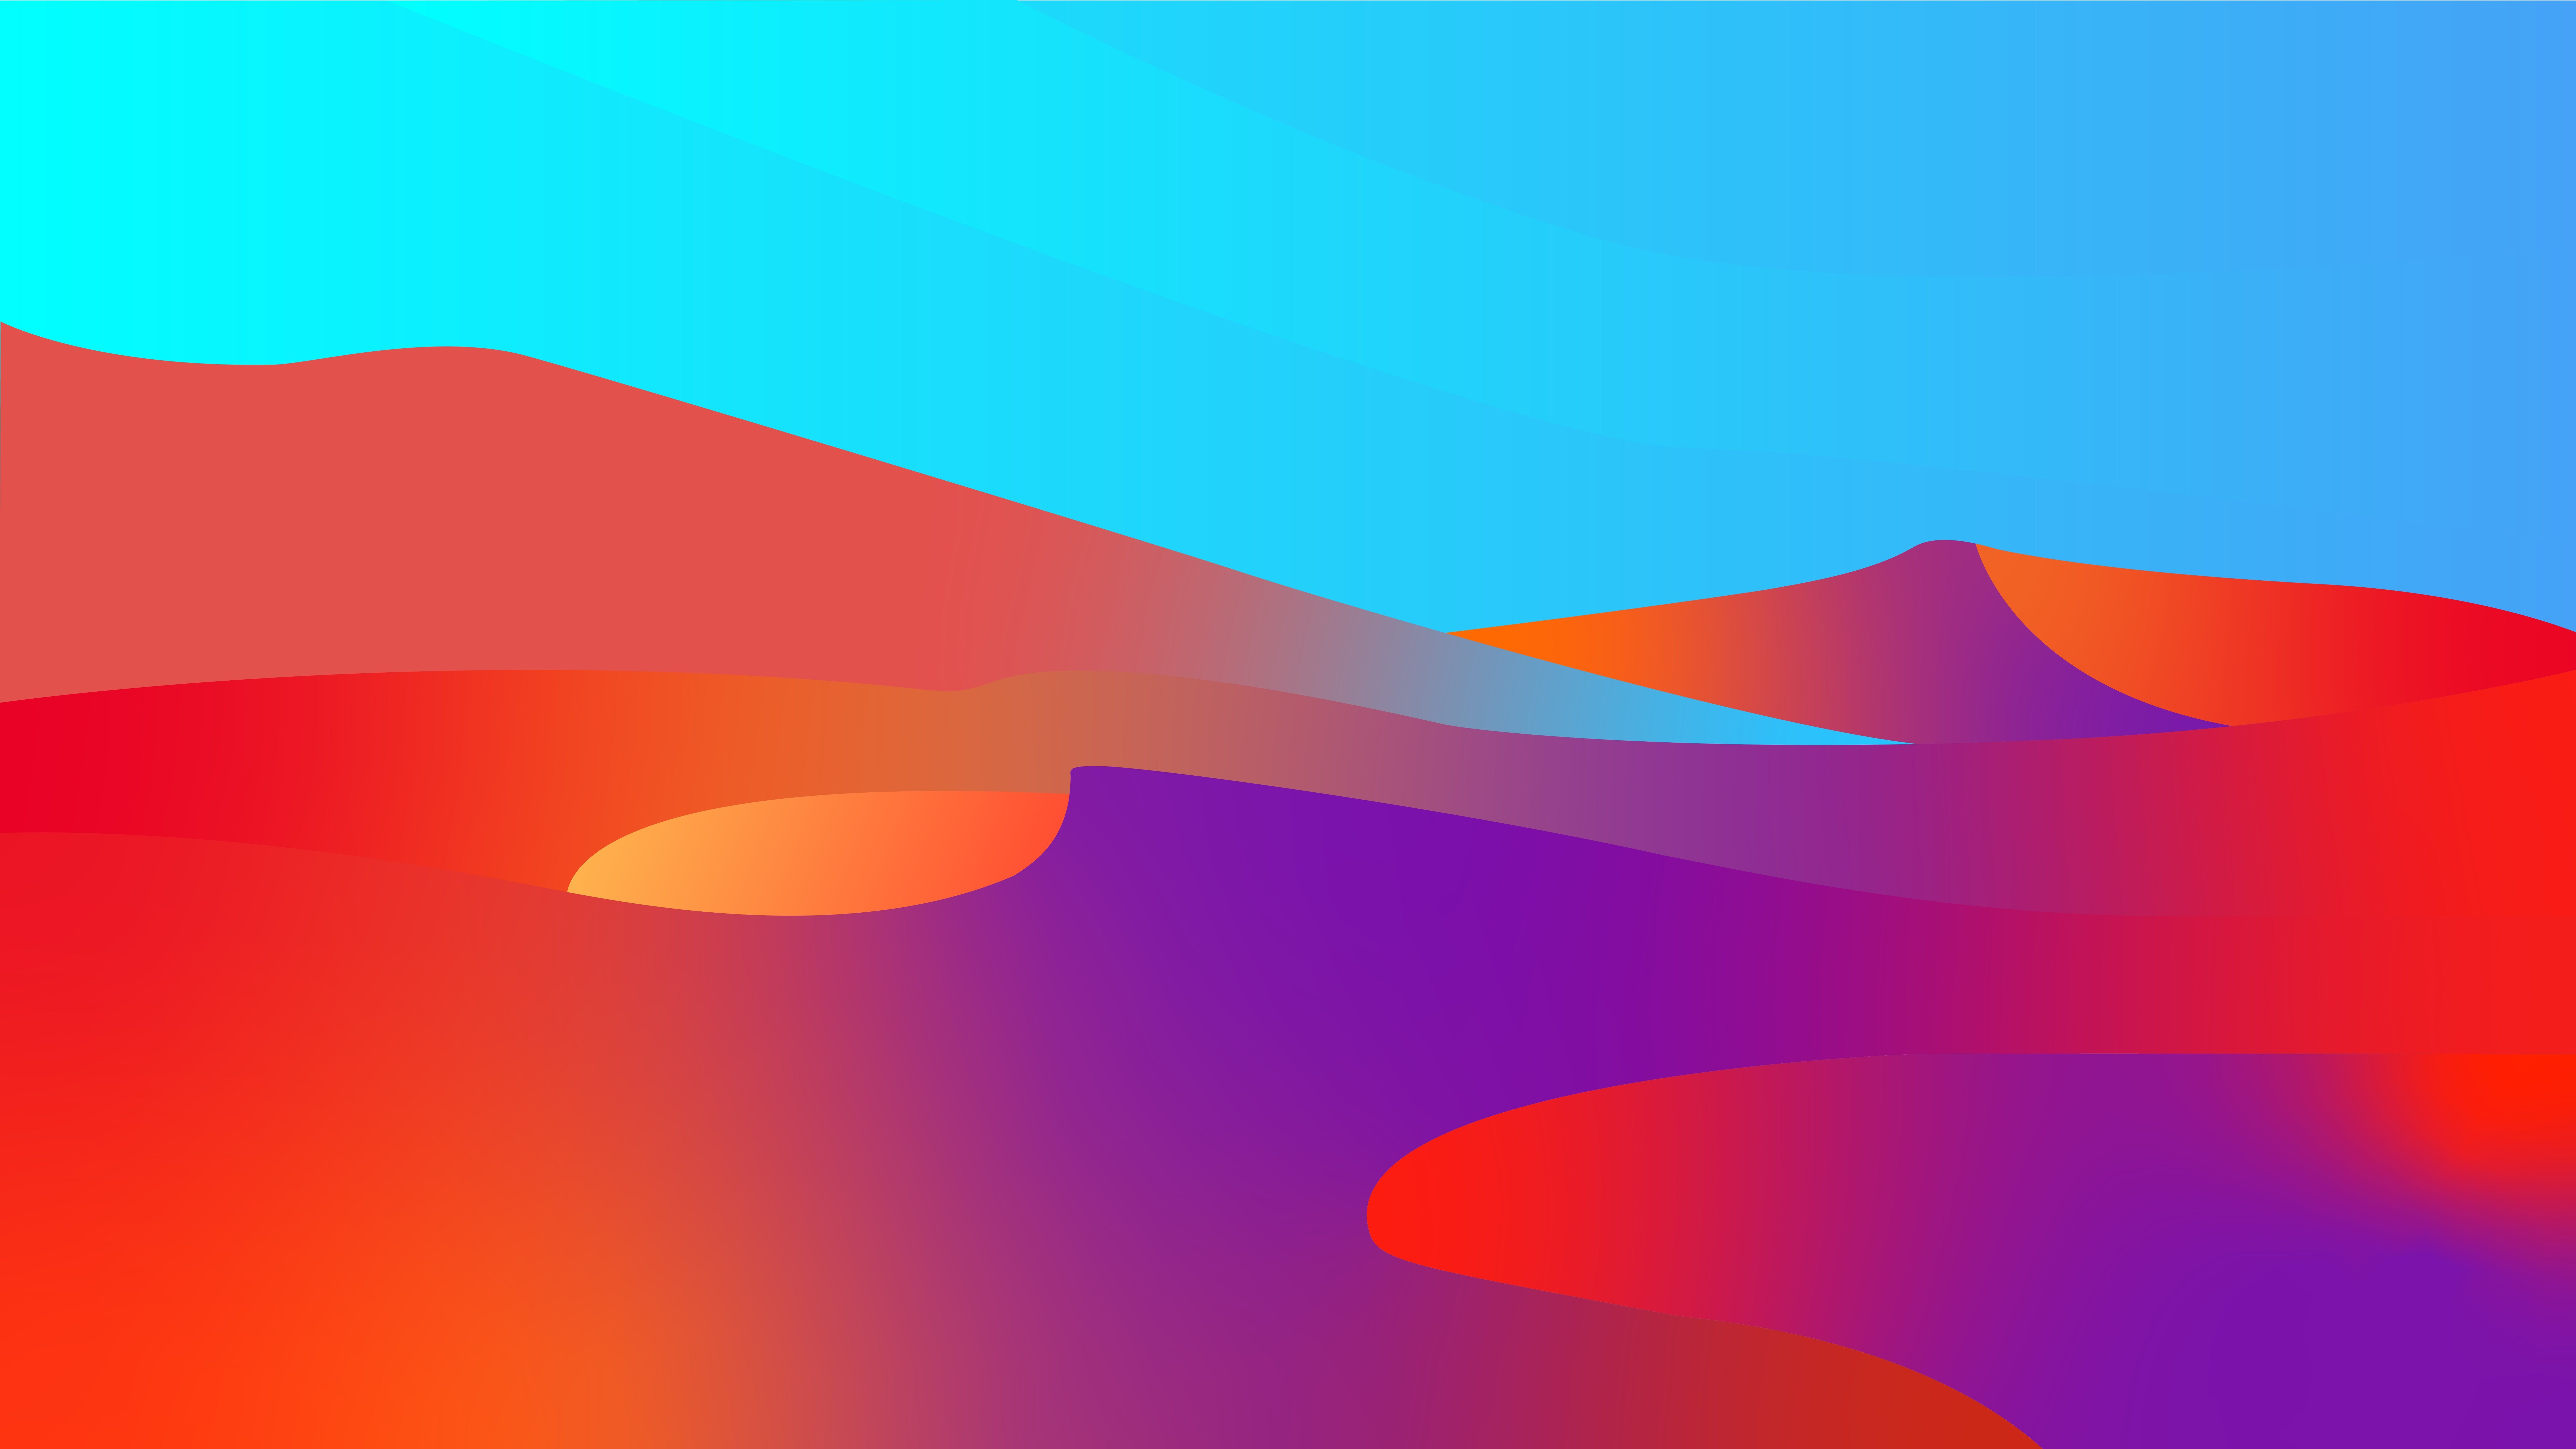 Recreate a Bigsur Style Wallpaper From Apple's Desert Wallpaper. if anyone thinks can do better this then I have an illustrator file